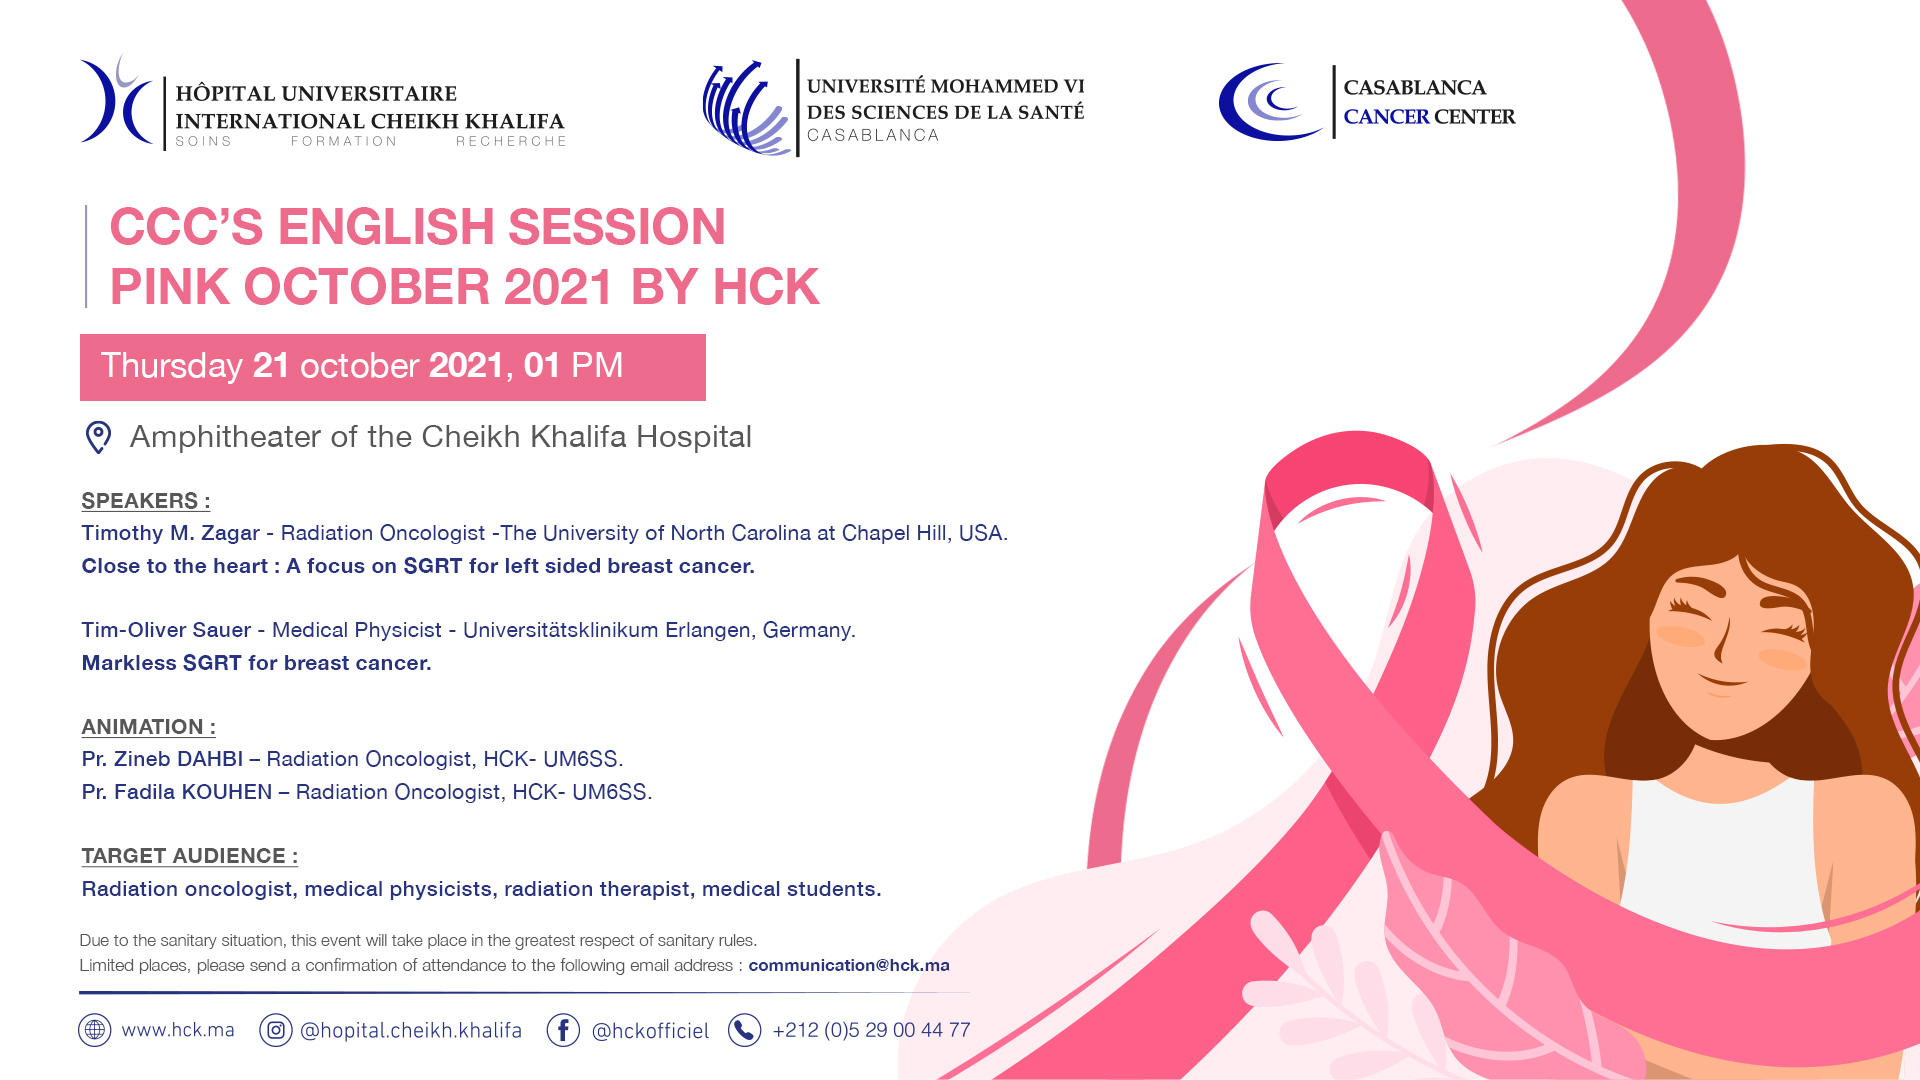 CCC's ENGLISH SESSION PINK OCTOBER 2021 BY HCK